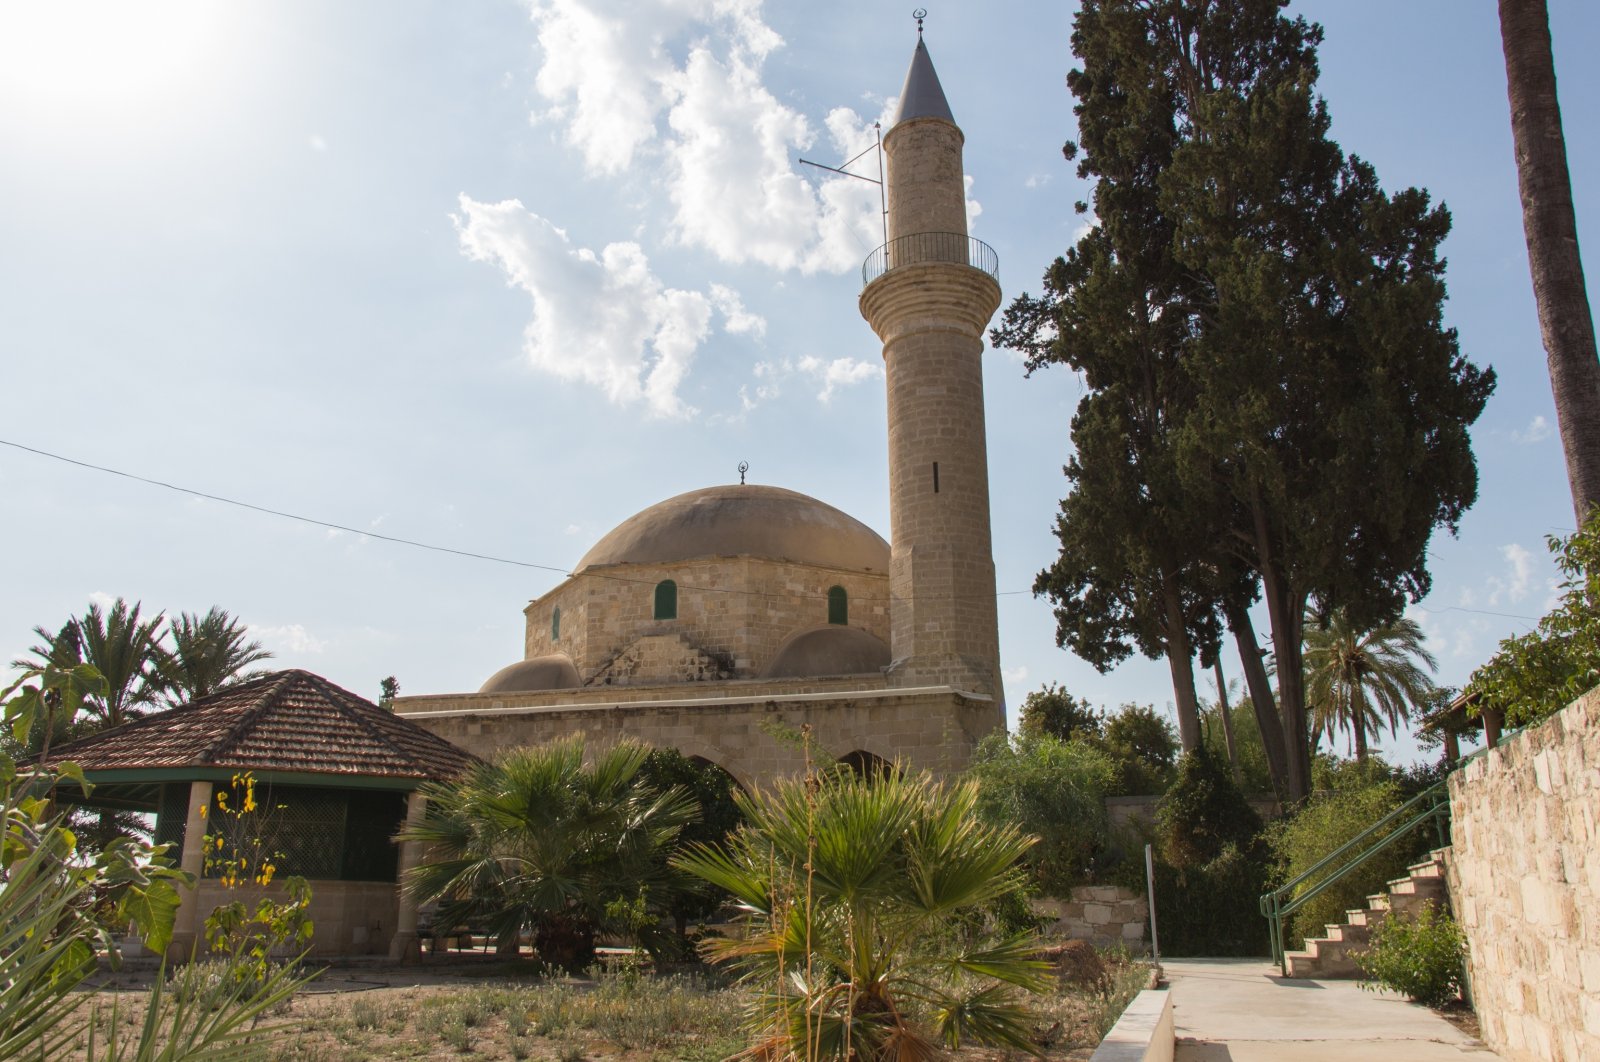 This file photo shows the exterior view of Hala Sultan Tekke, also known as the Mosque of Umm Haram, located in Larnaca in the Greek Cypriot administration, Oct. 16, 2019. (Shutterstock Photo)